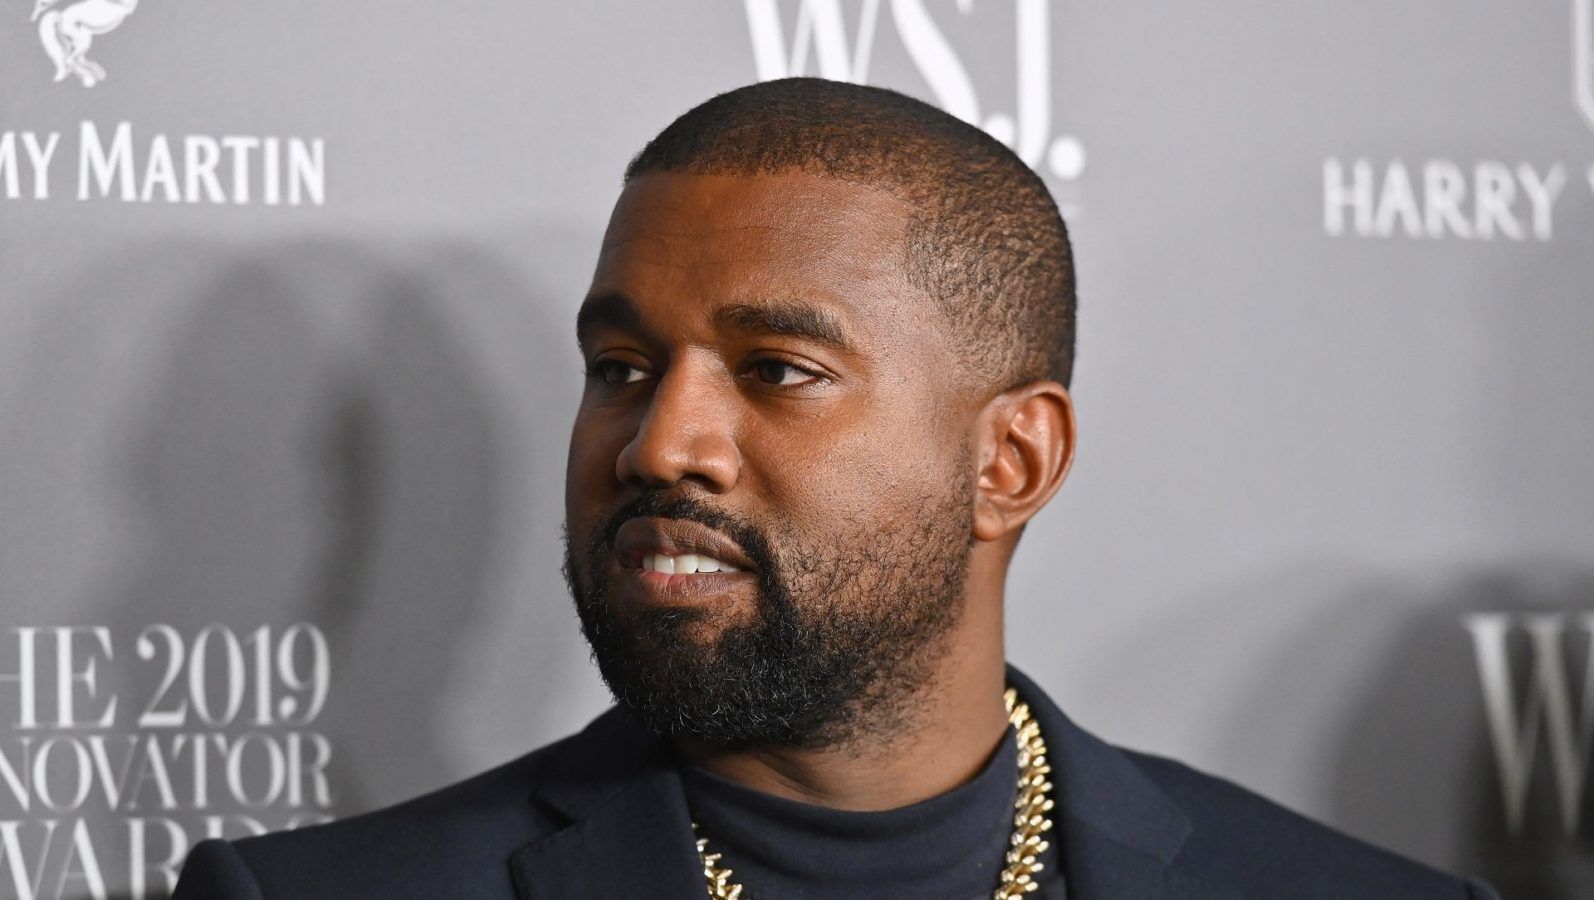 All the controversy surrounding the release of ‘Donda’, Kanye West’s new album